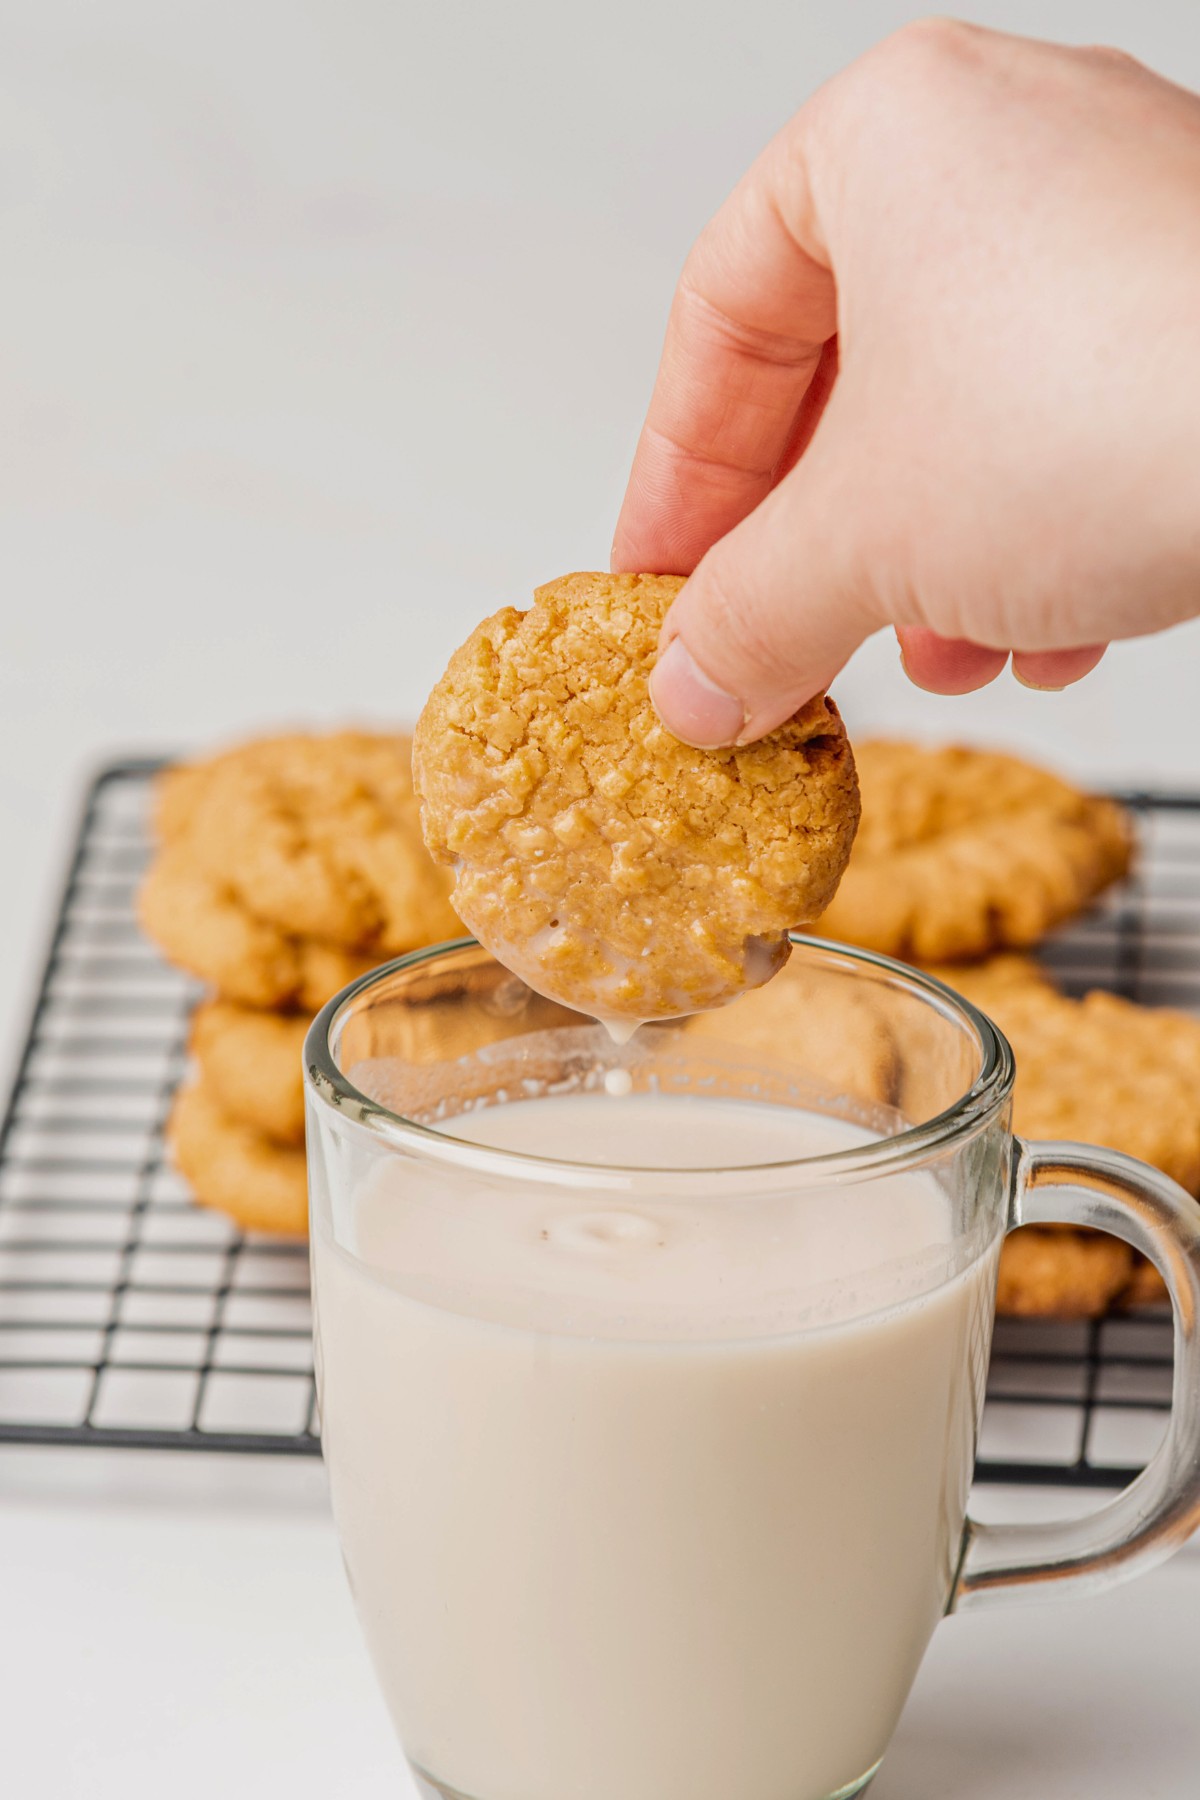 dunked peanut butter cookie into a glass of milk. 